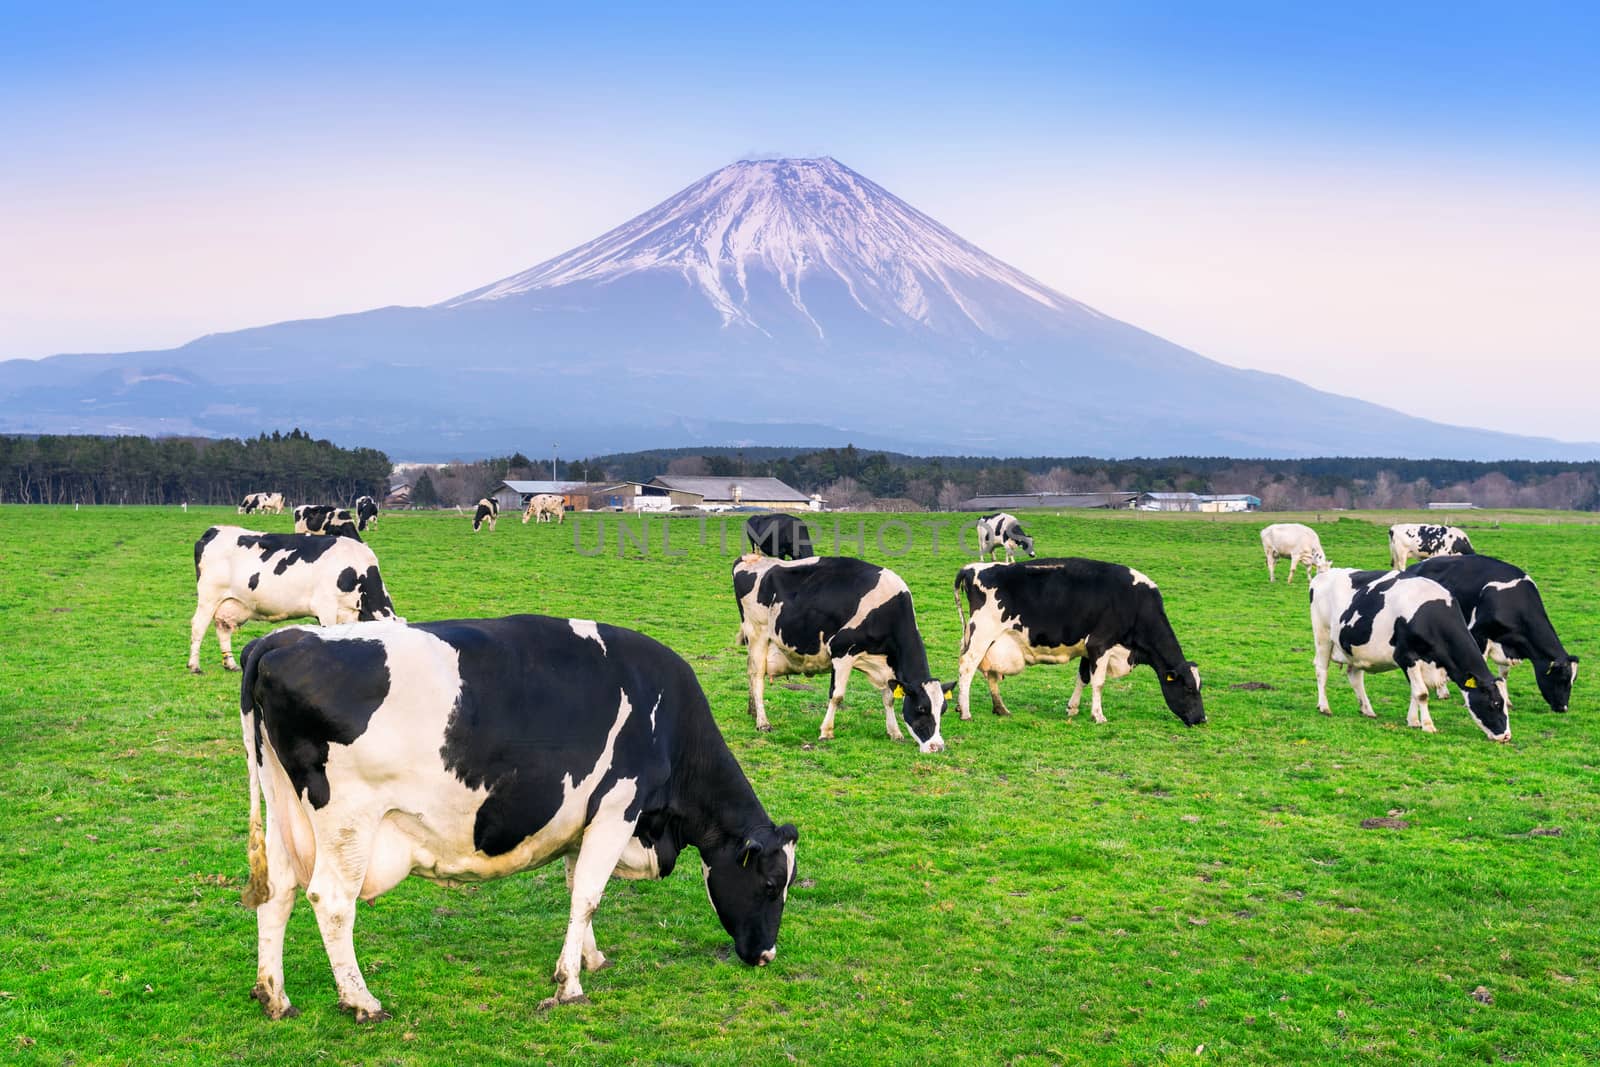 Cows eating lush grass on the green field in front of Fuji mountain, Japan. by gutarphotoghaphy